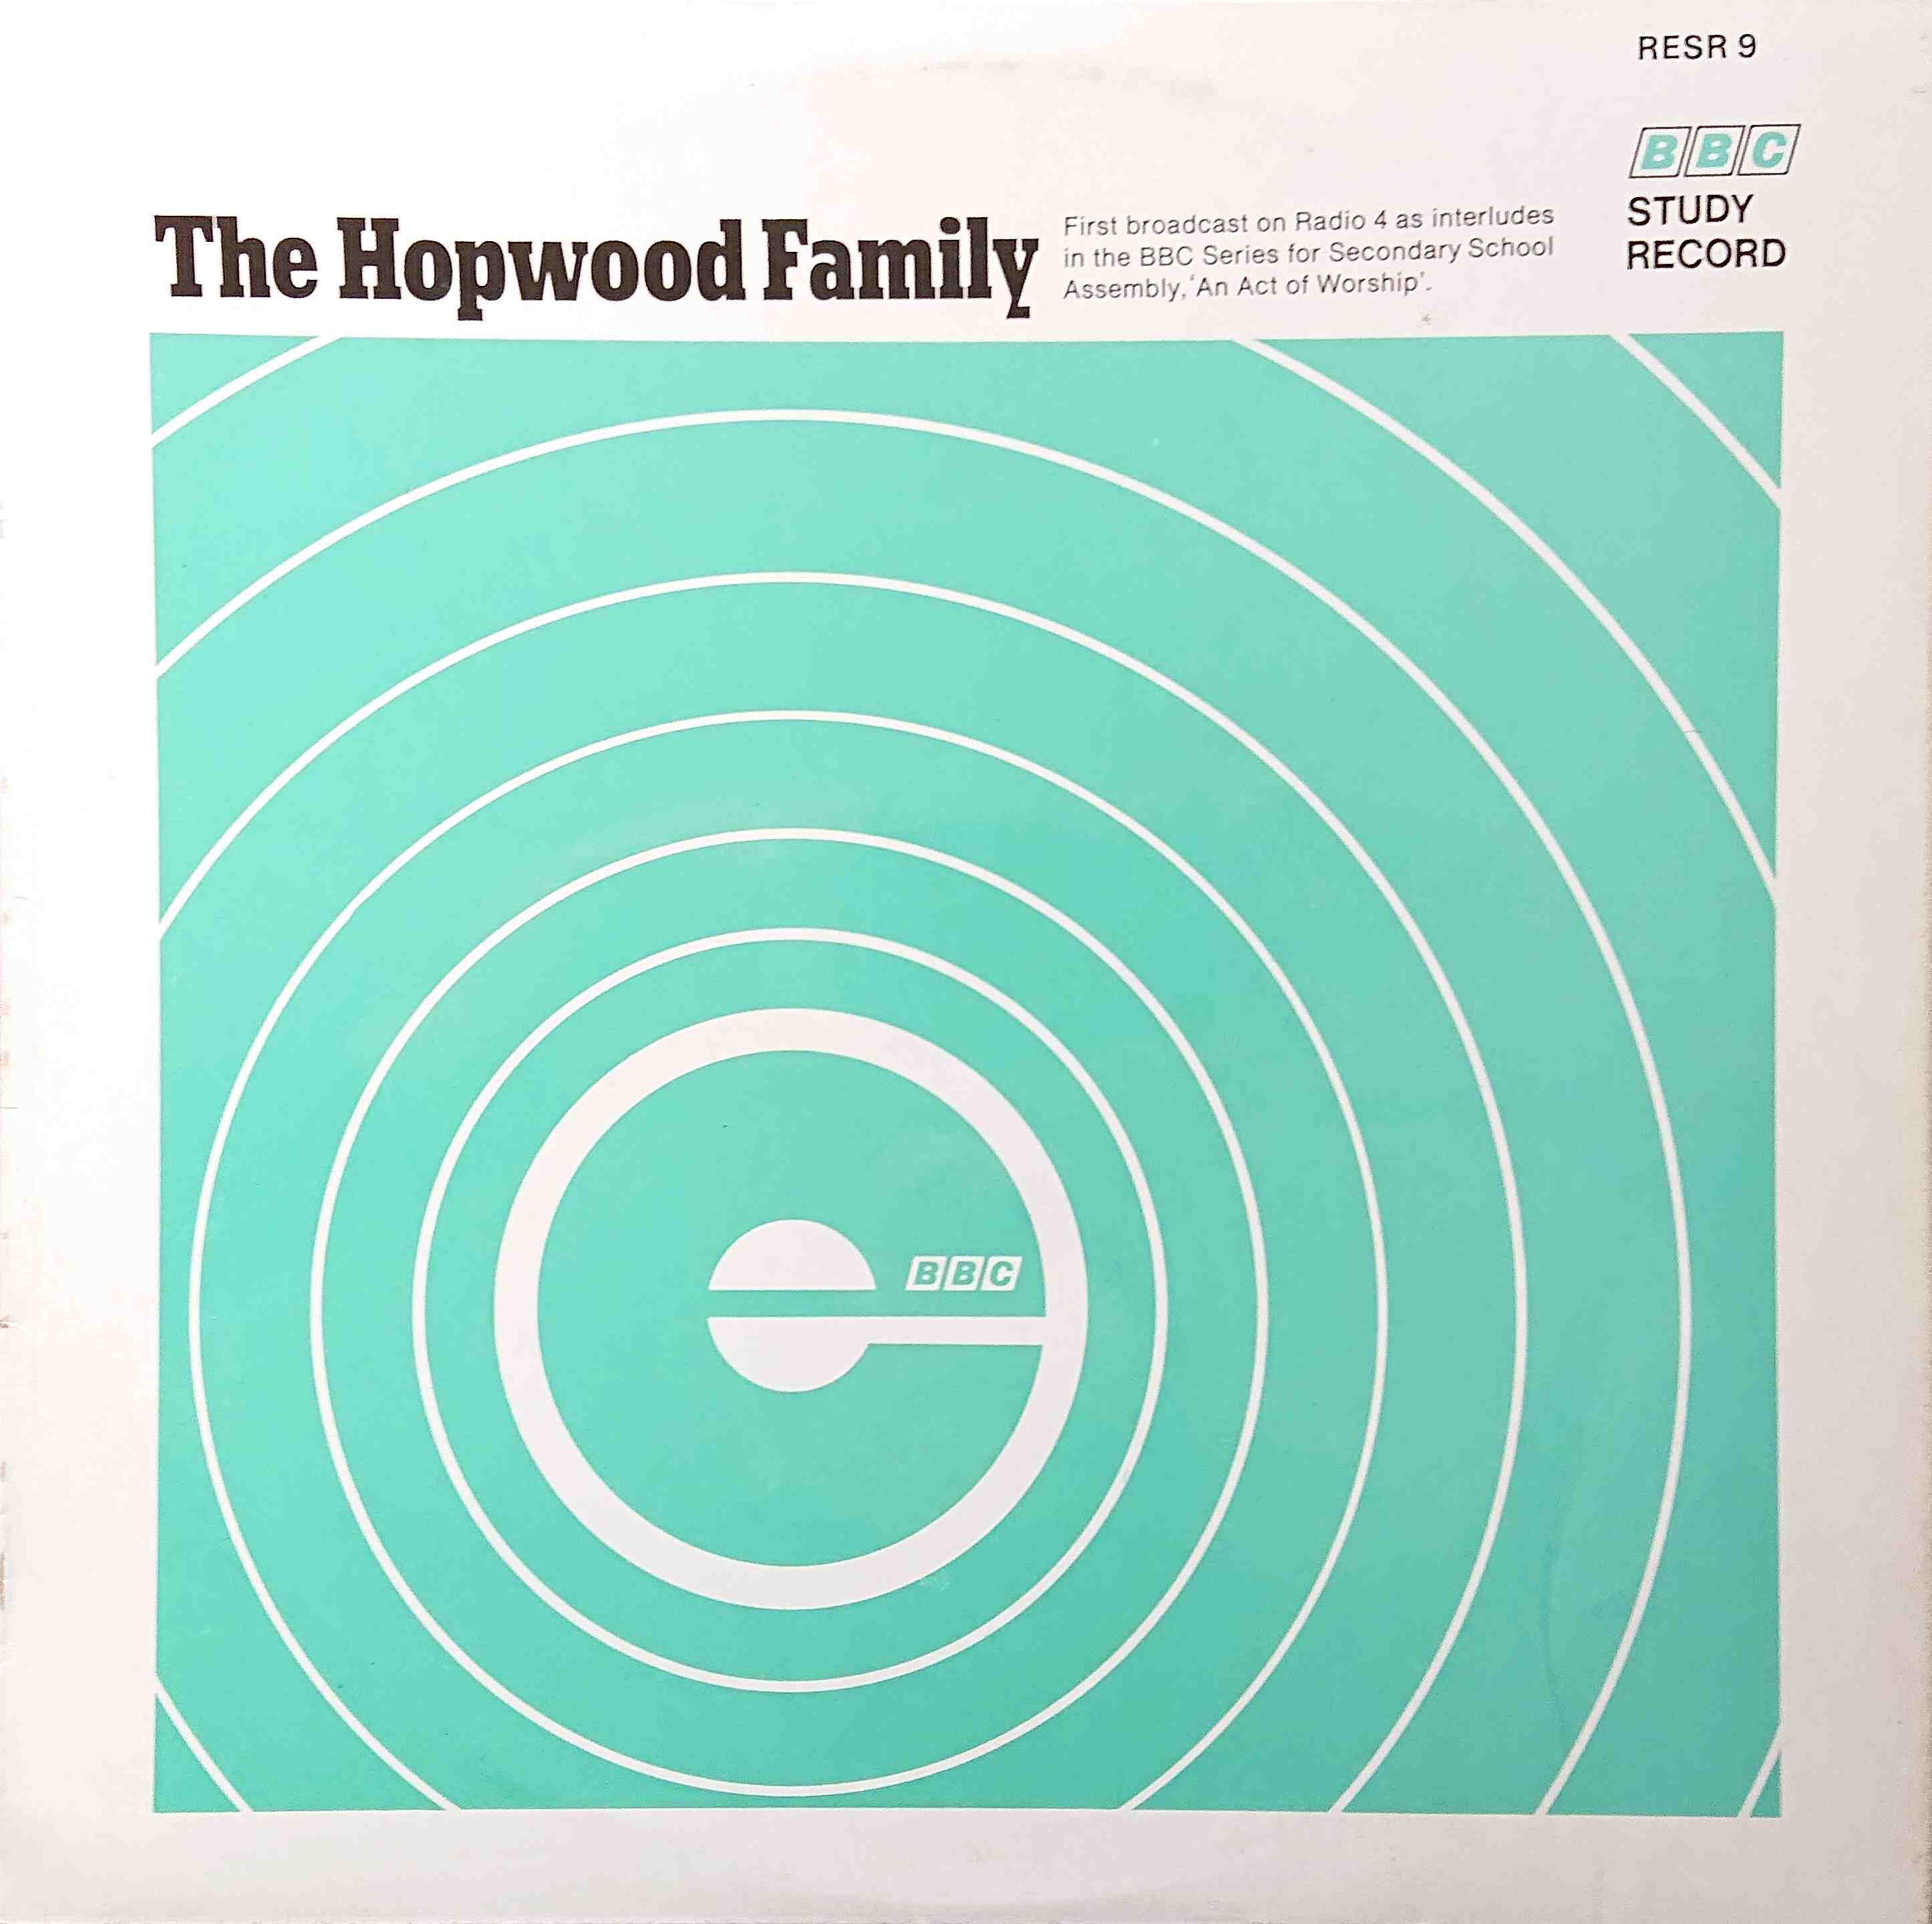 Picture of The Hopwood family by artist Robert Lamb from the BBC albums - Records and Tapes library